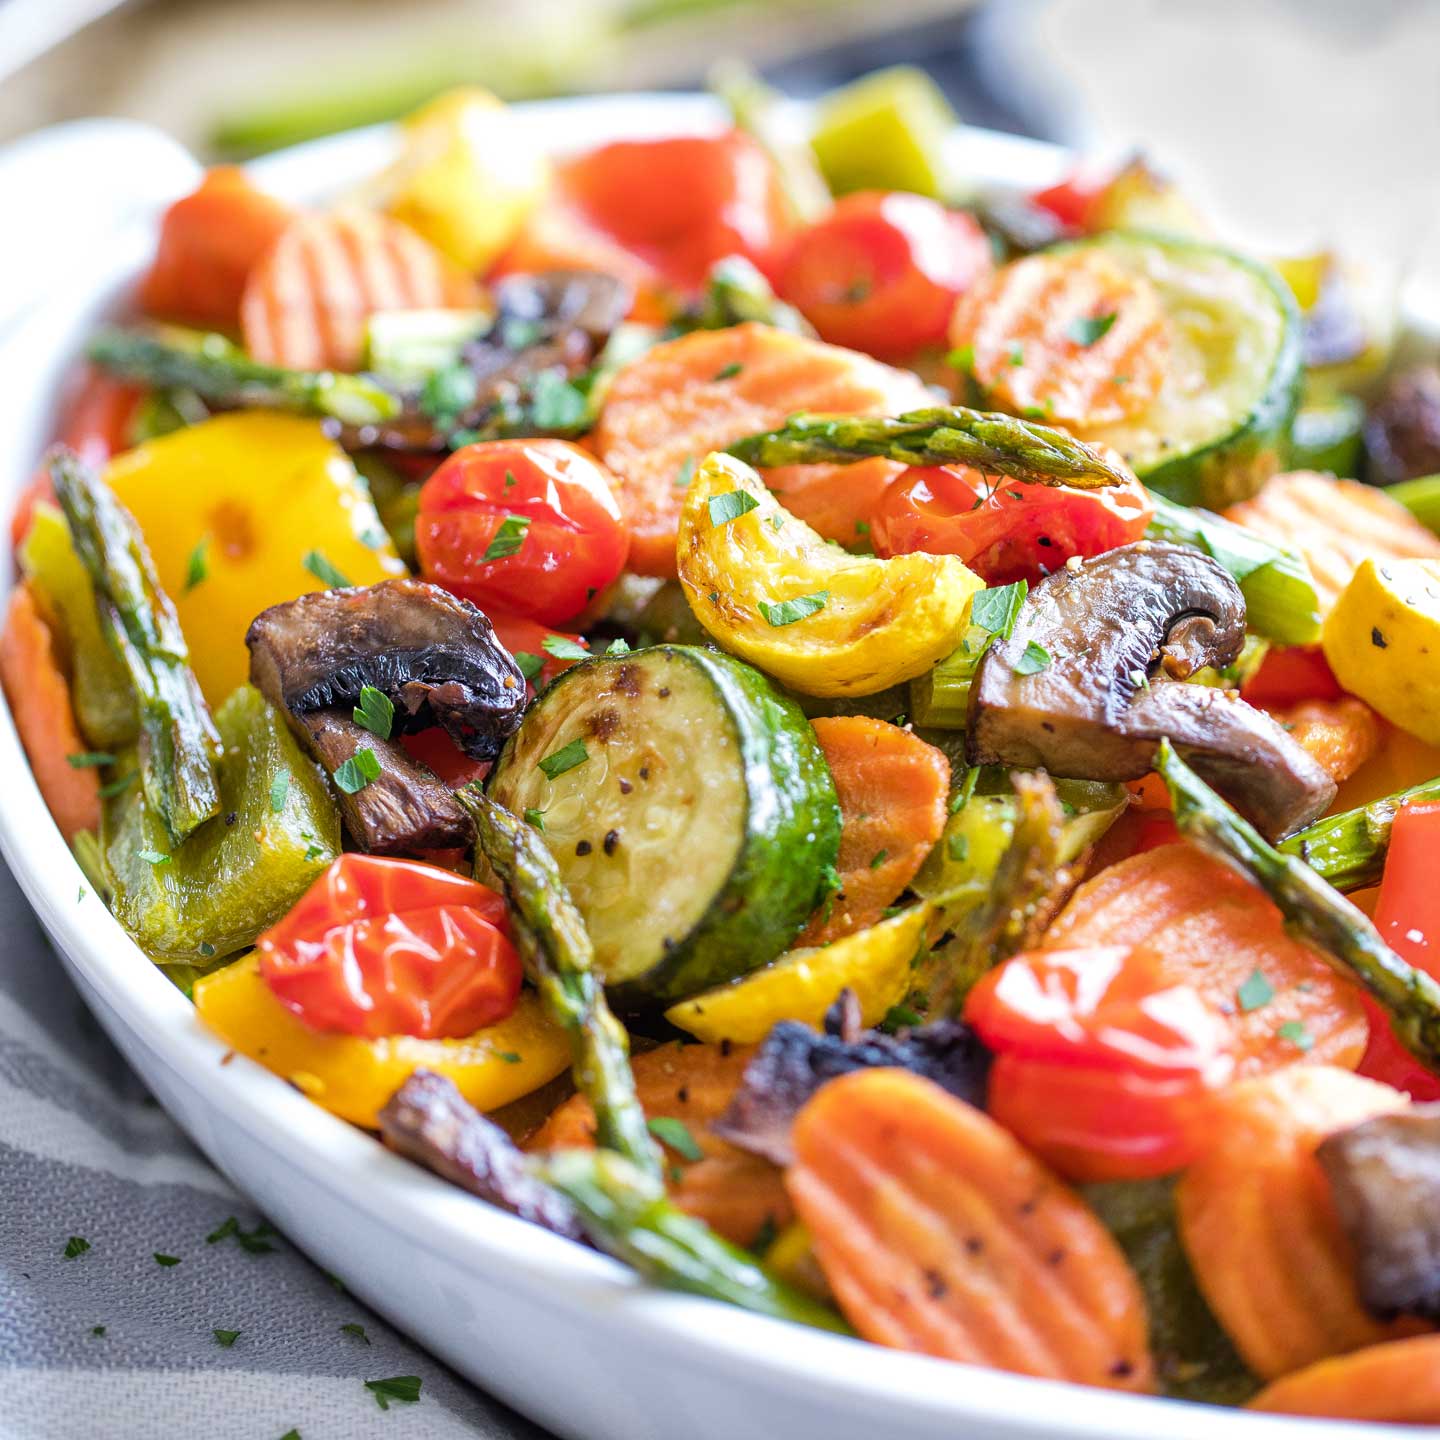 I. Introduction to Grilled Vegetable Medley